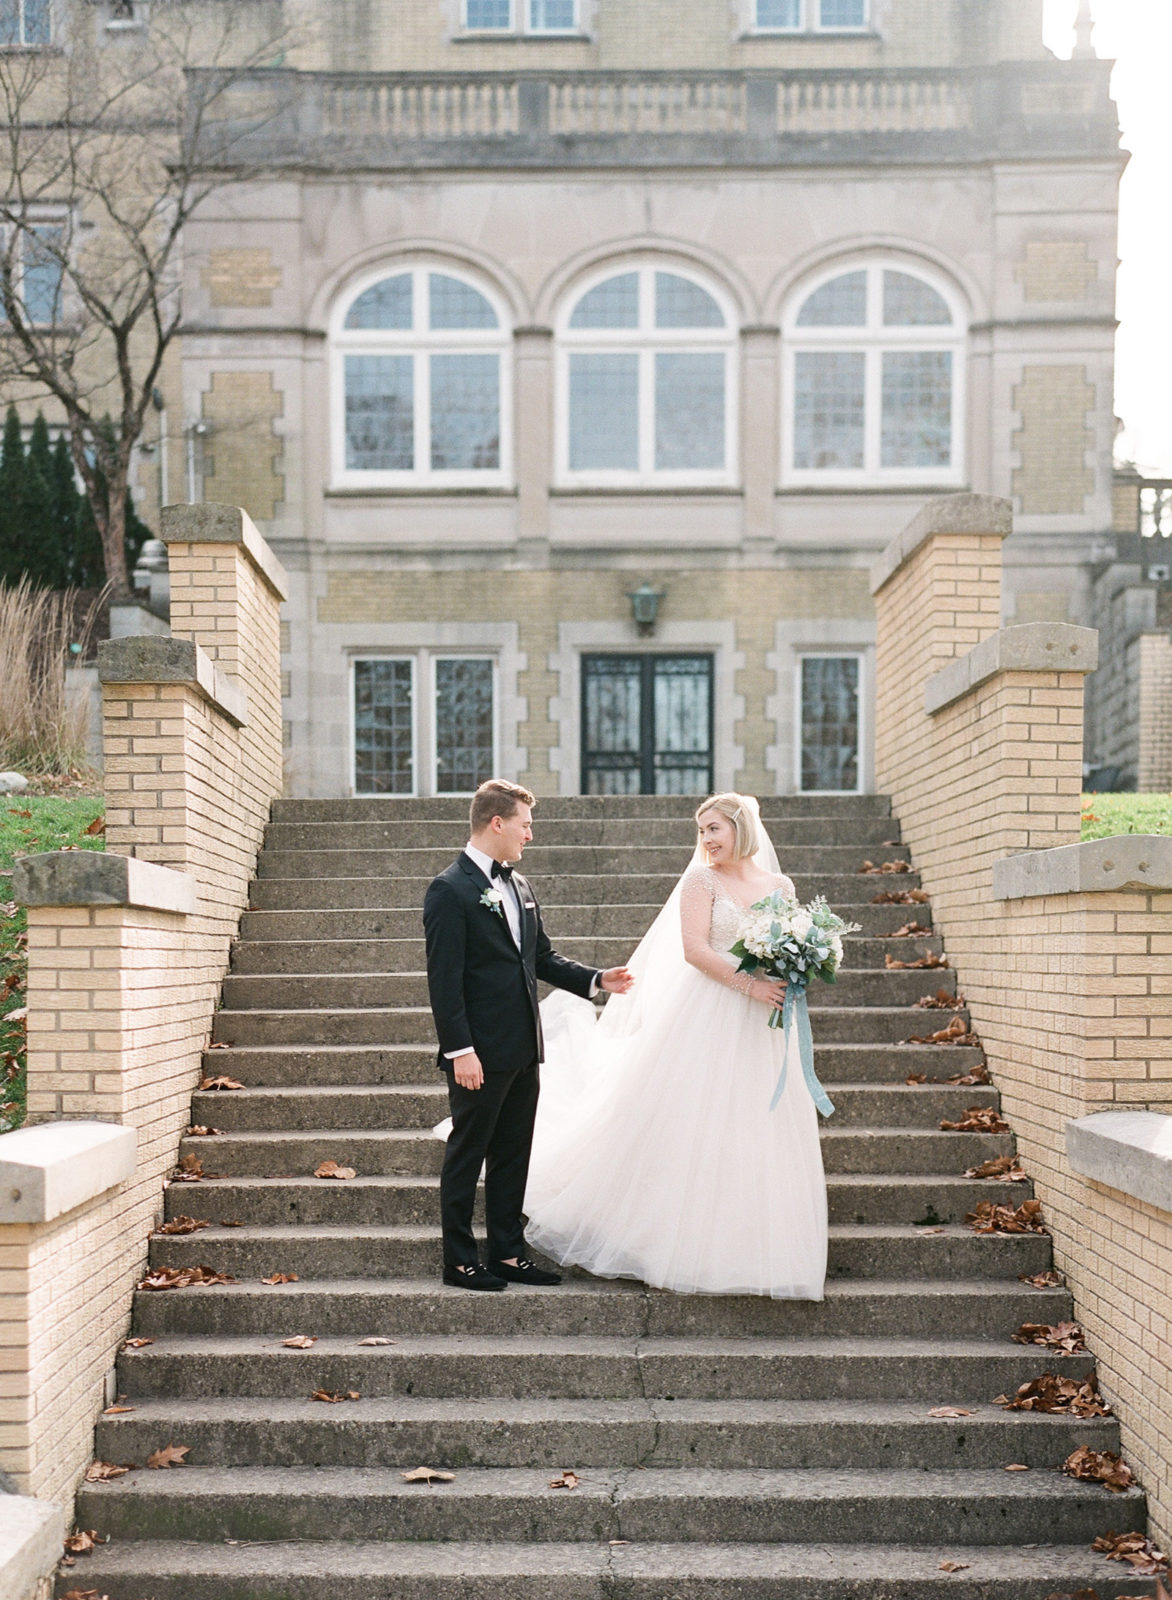 Laurel Hall Wedding Photographer | Estate Wedding Venue | Midwest Film Photographer | Molly Carr Photography | Best First Look